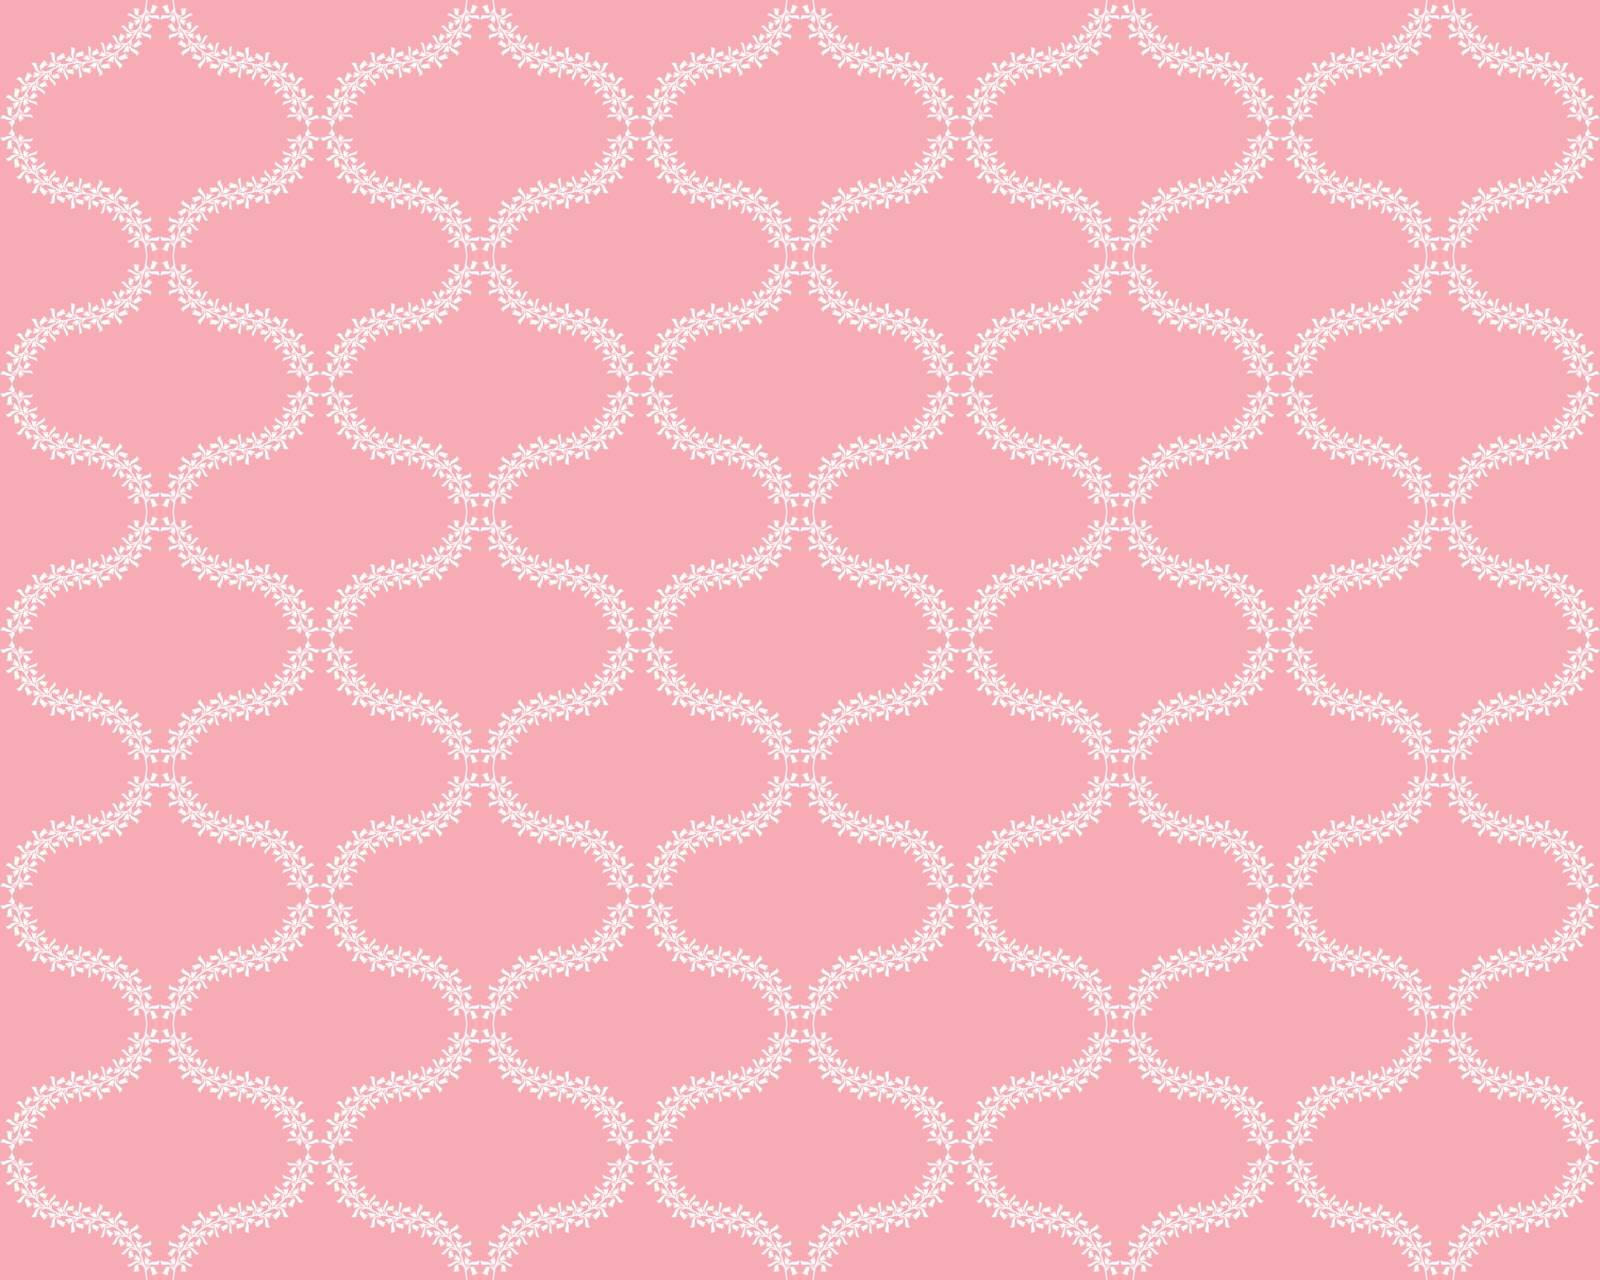 Seamless illustrated pattern made of white leaves and flowers on pink background